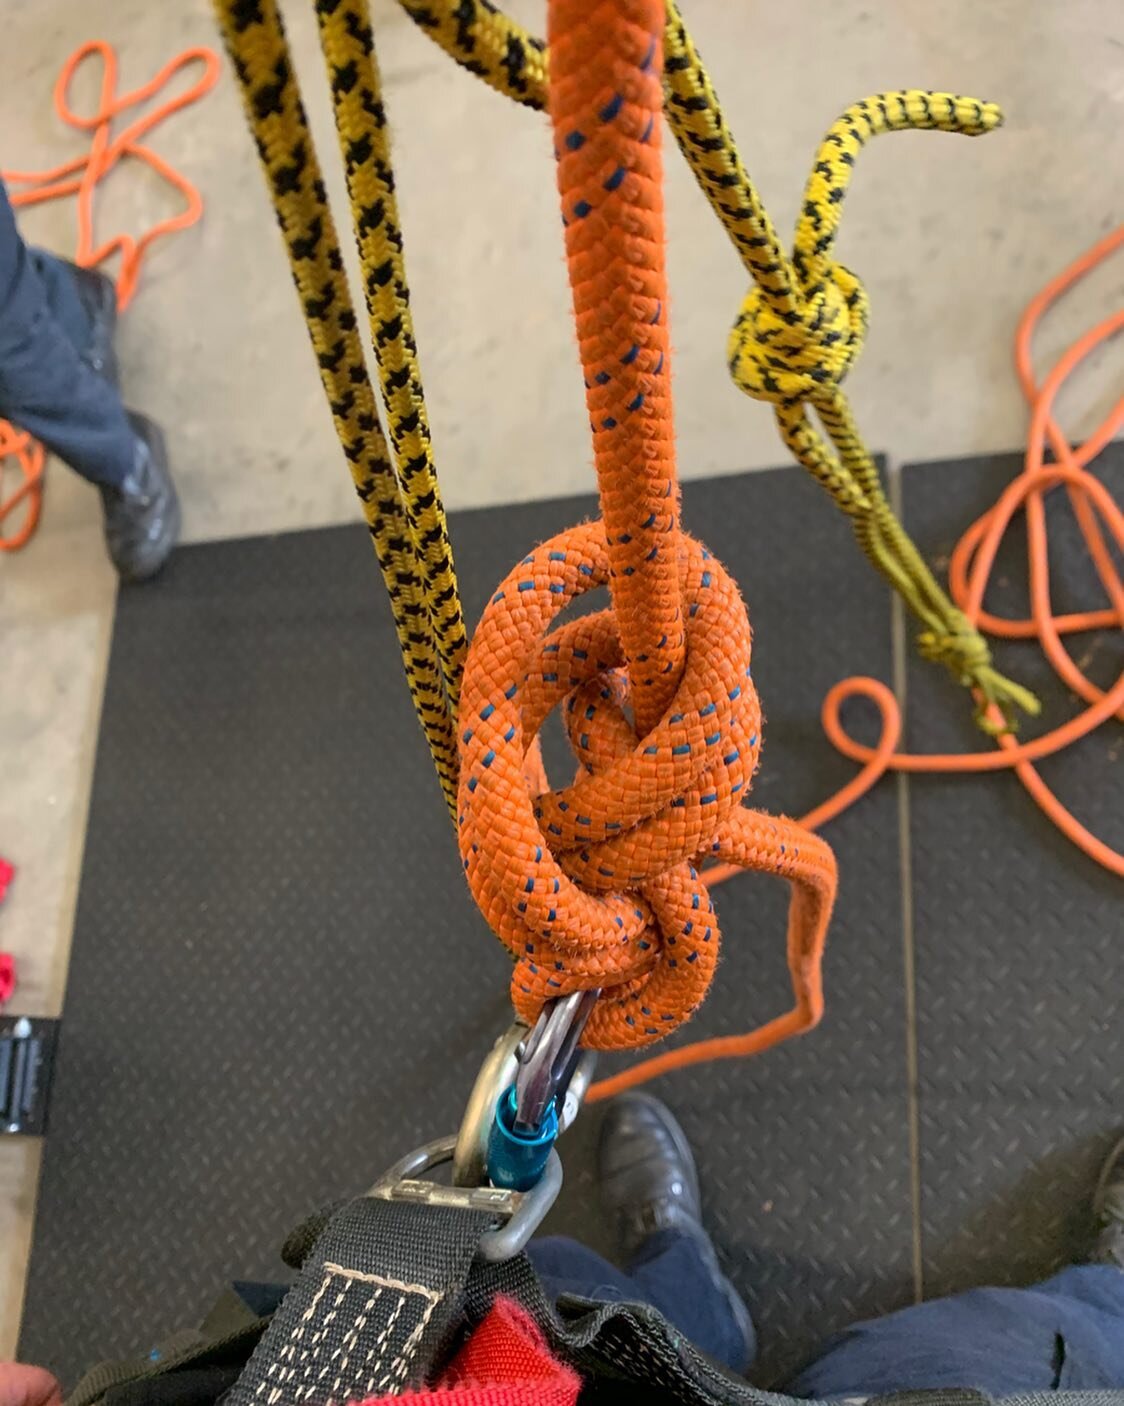 Today members took the time to go over some personal rope skills which included ascending and descending. When ascending we used a set of Purcell Prusiks. While descending we repelled using a Munter hitch. To add to the challenge, knots were required